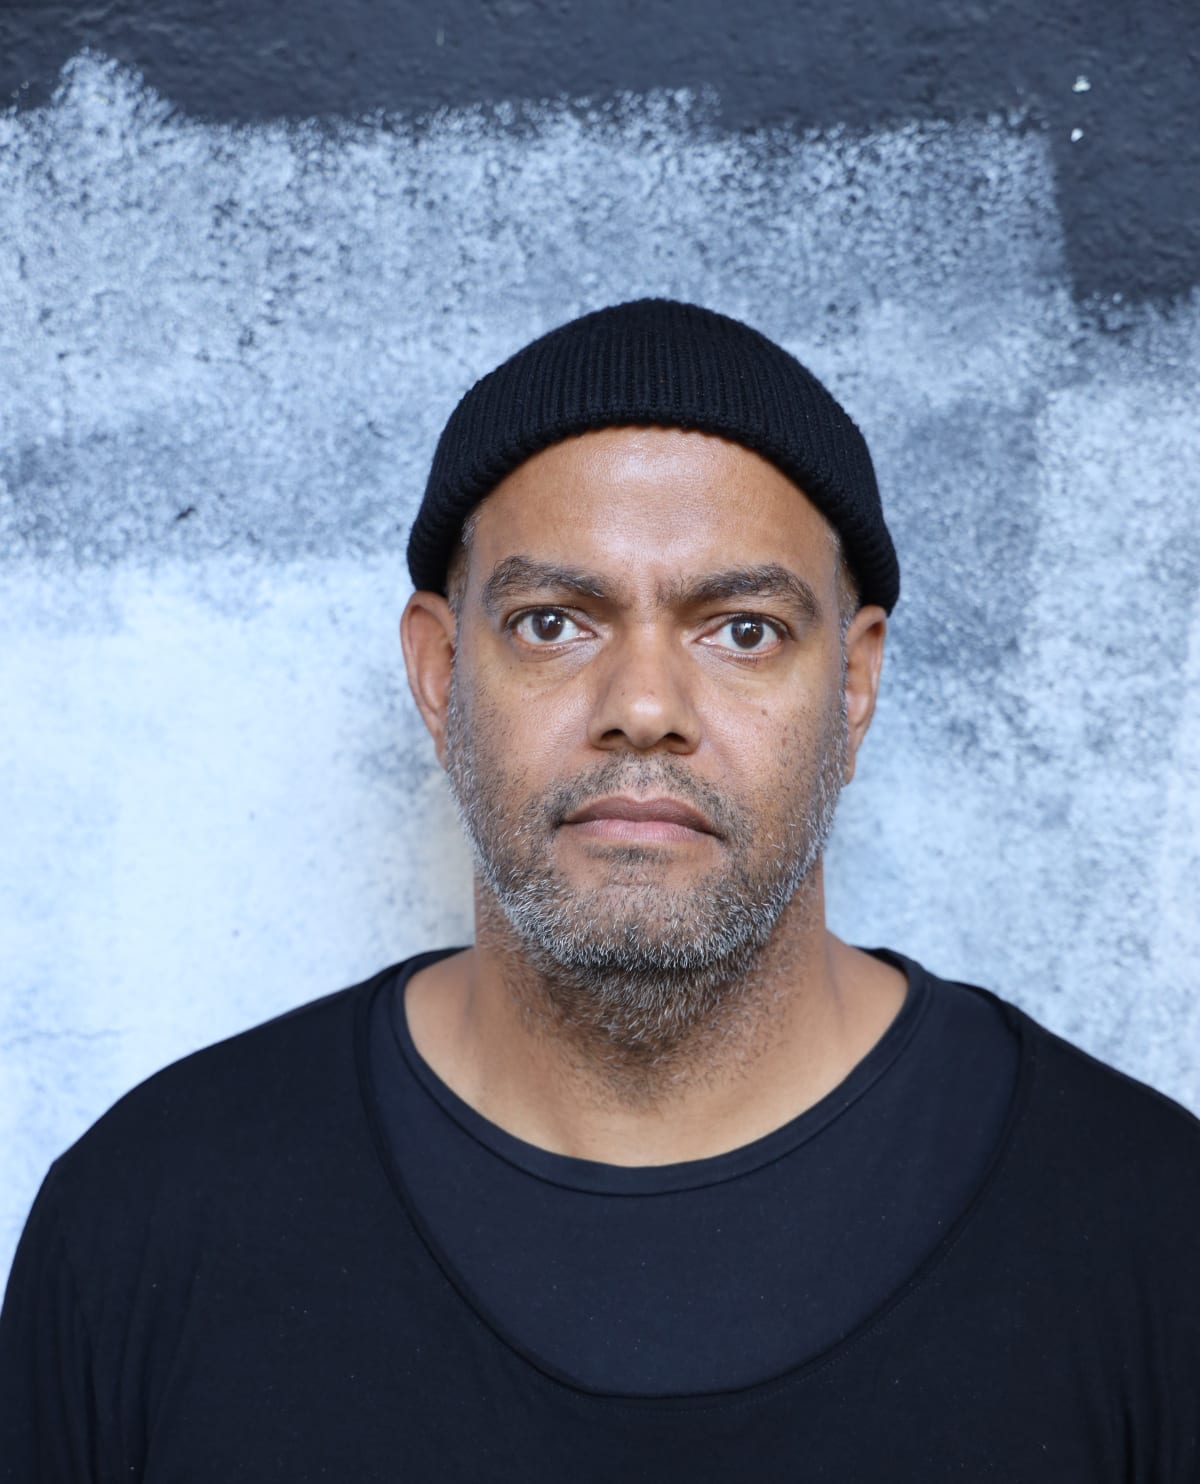 Rewriting Narratives and Rewiring Movements: An Interview with Douglas Diaz, Berlin, Germany